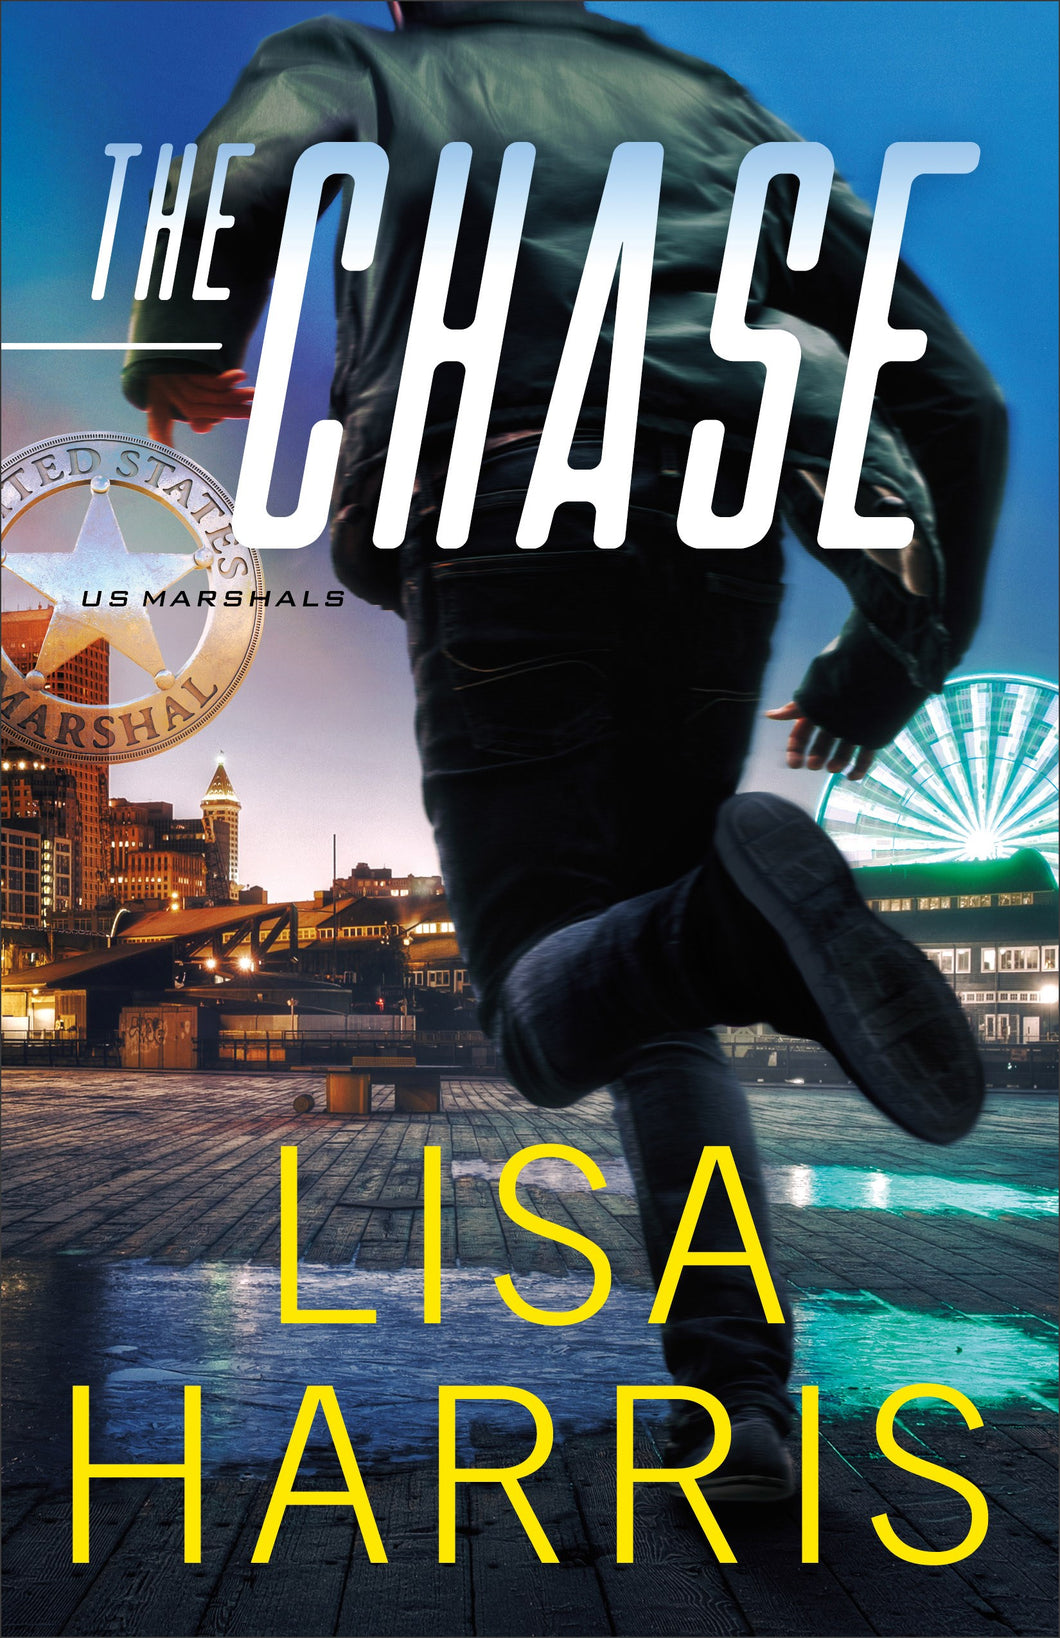 The Chase (US Marshals #2)